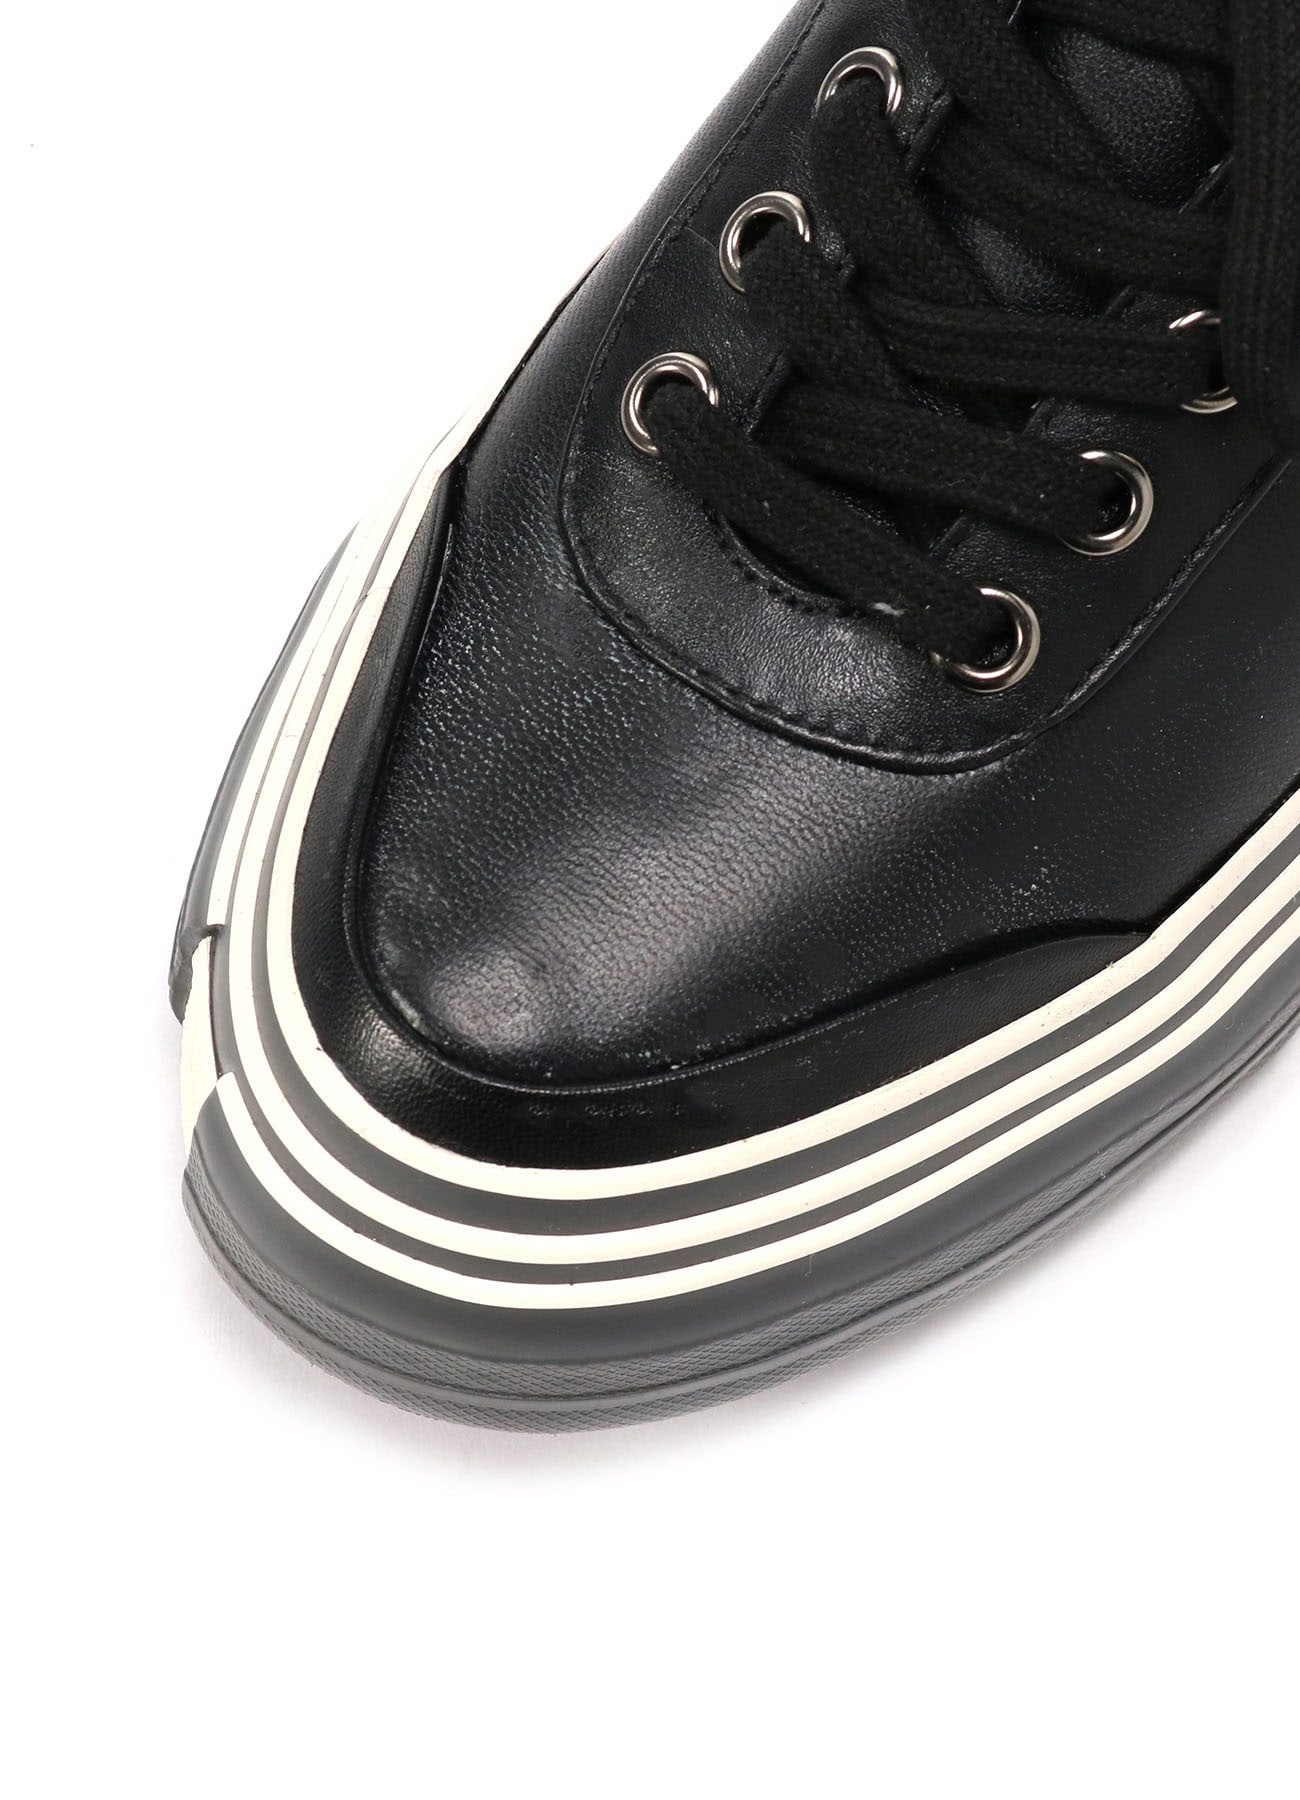 SNEAKER MATERIAL A 5HOLE LOWCUT SNEAKERS